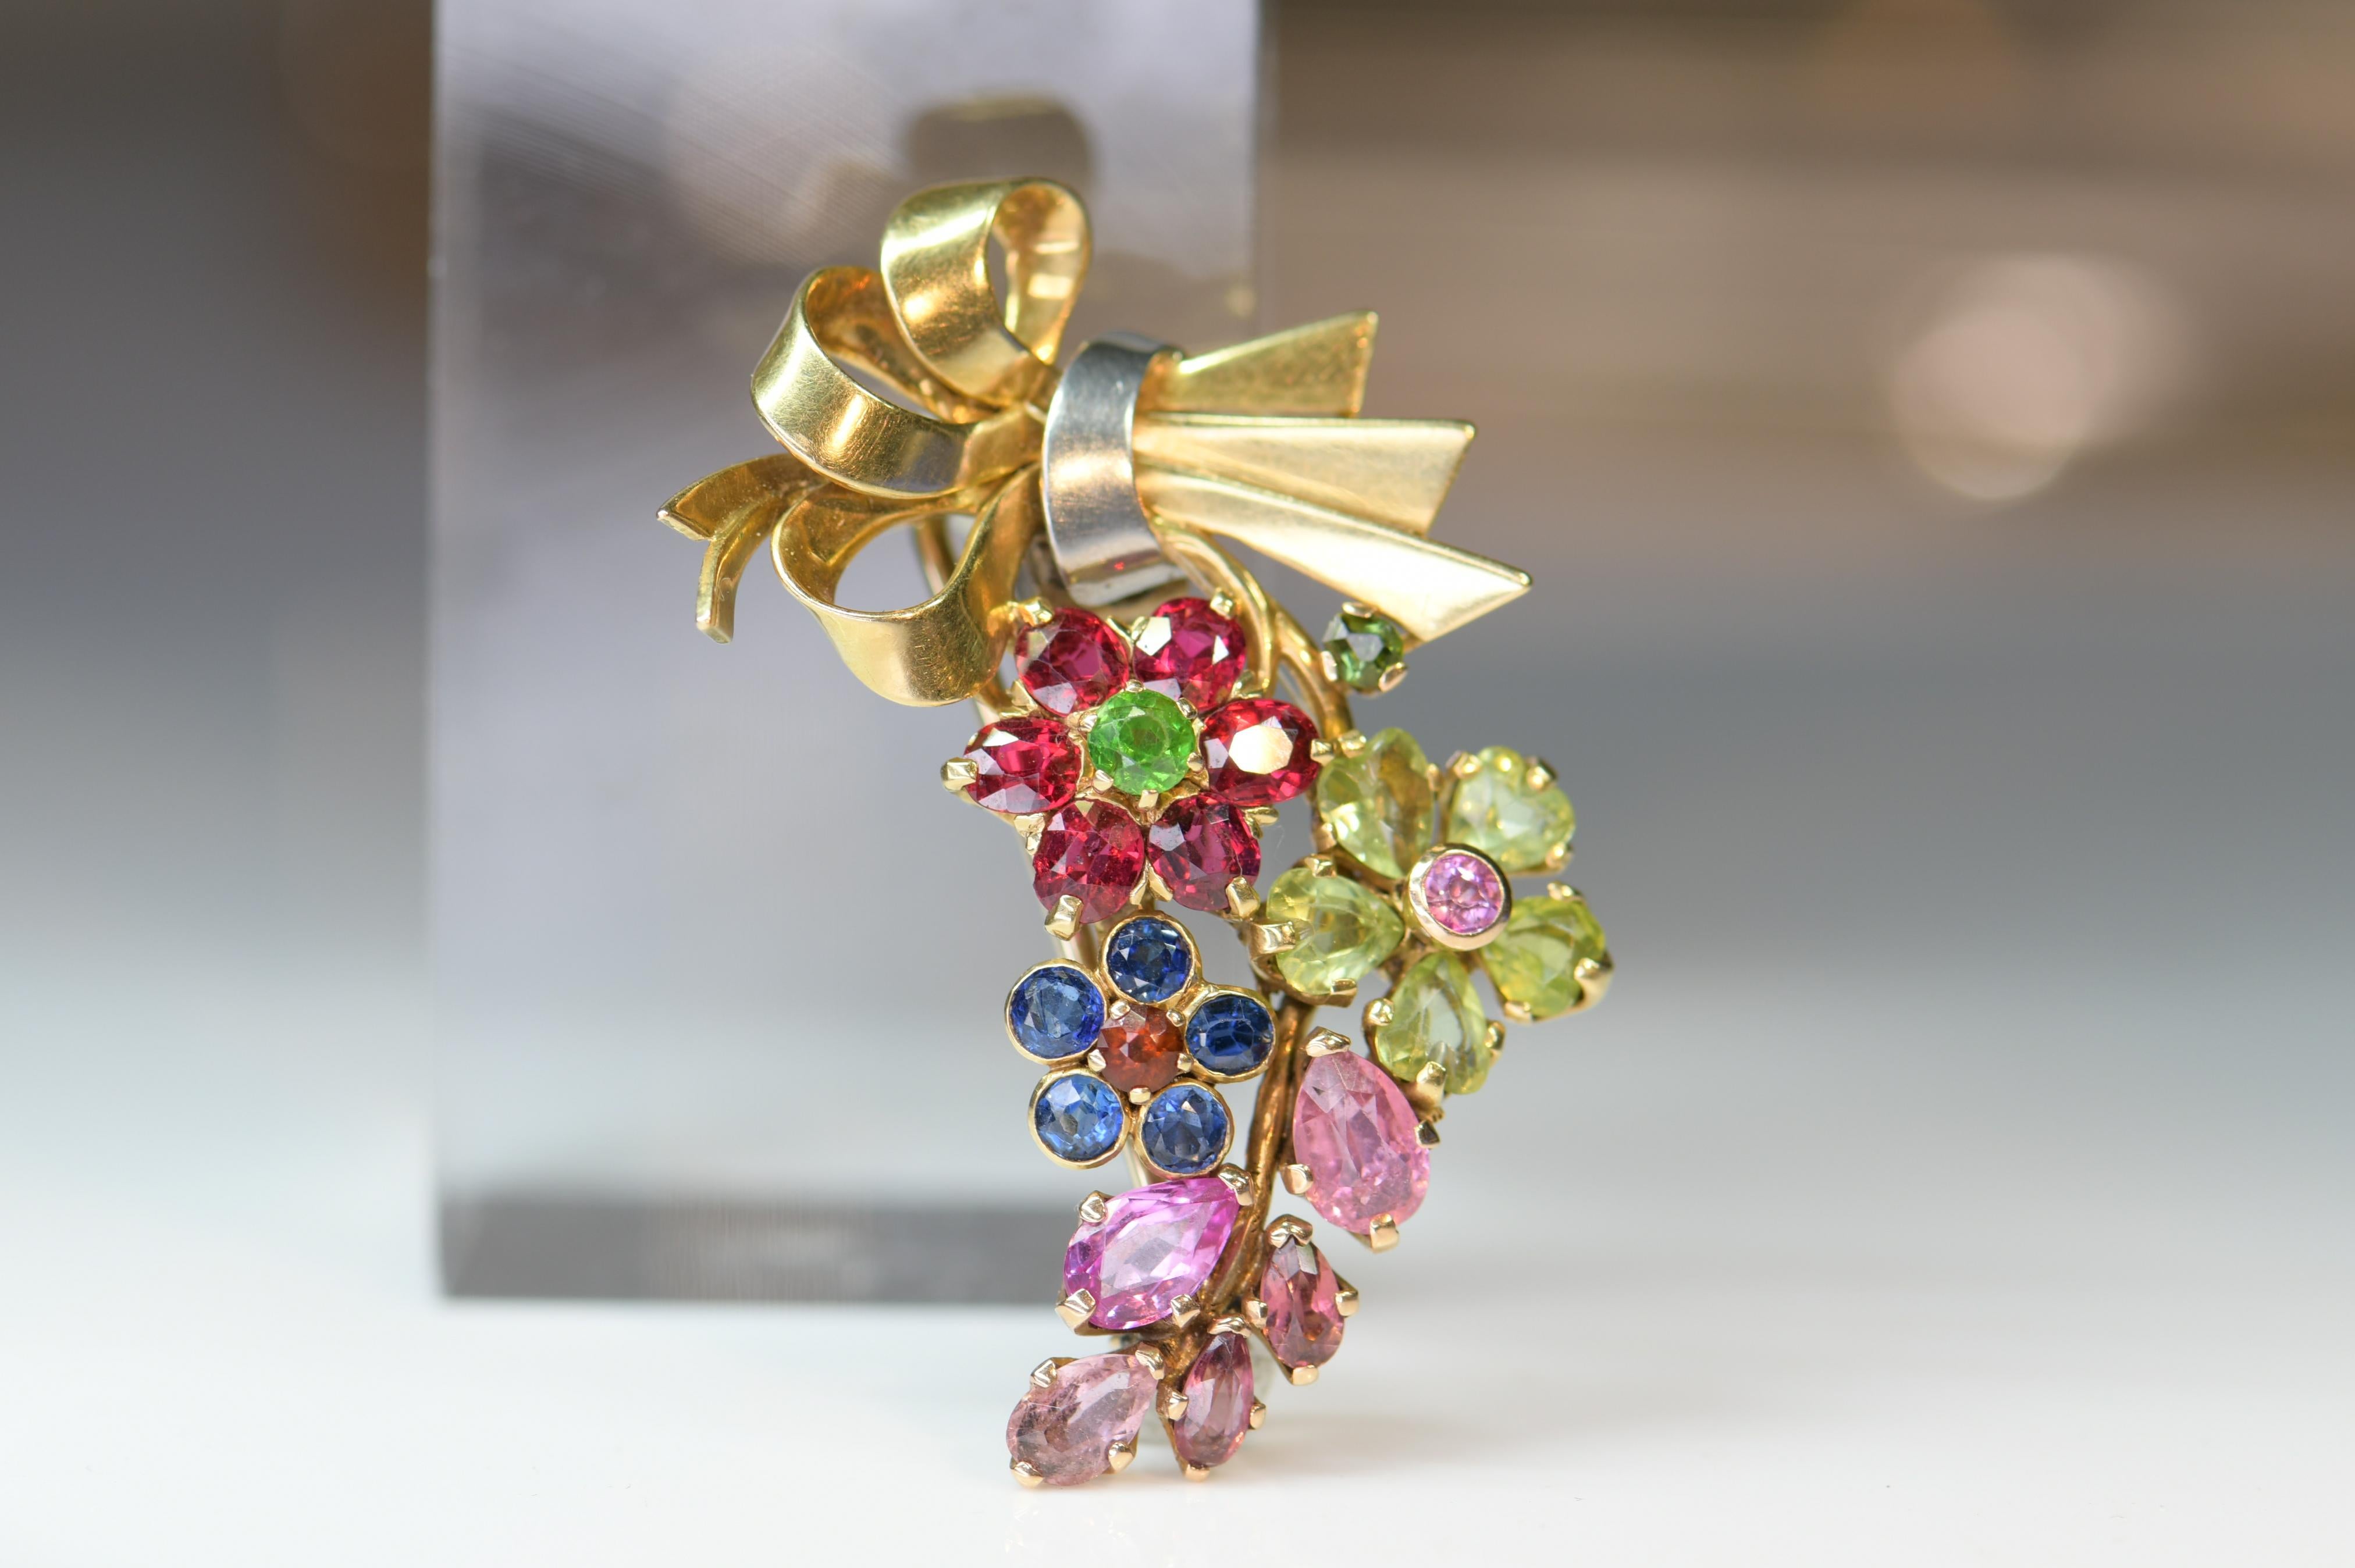 This gorgeous flower spray vintage brooch set throughout with graduated floral clusters of sapphires, garnets, peridots, etc. It has been crafted in 18ct yellow gold.

SKU: AT-0560
WEIGHT
15.7g

SIZE
45 x 30 mm

MARKS
Unmarked, tests 18K